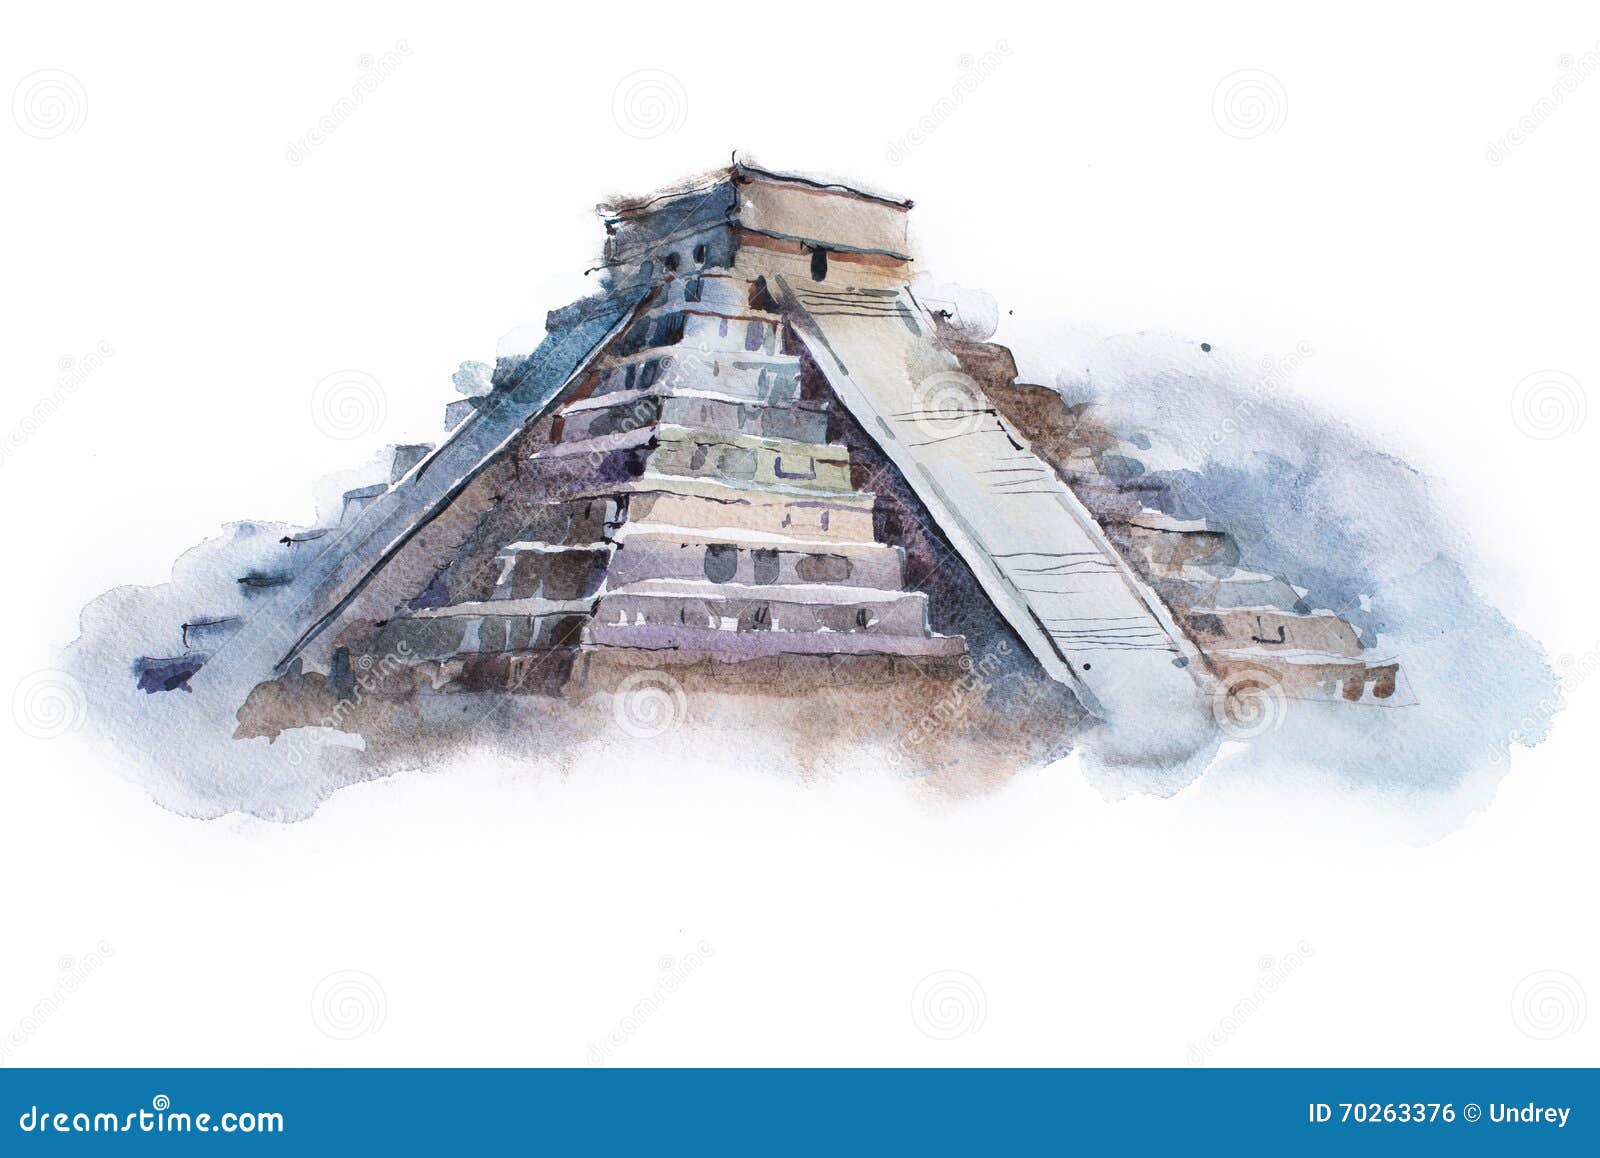 pyramid chichen itza in mexico watercolor drawing. temple of kukulkan aquarelle painting